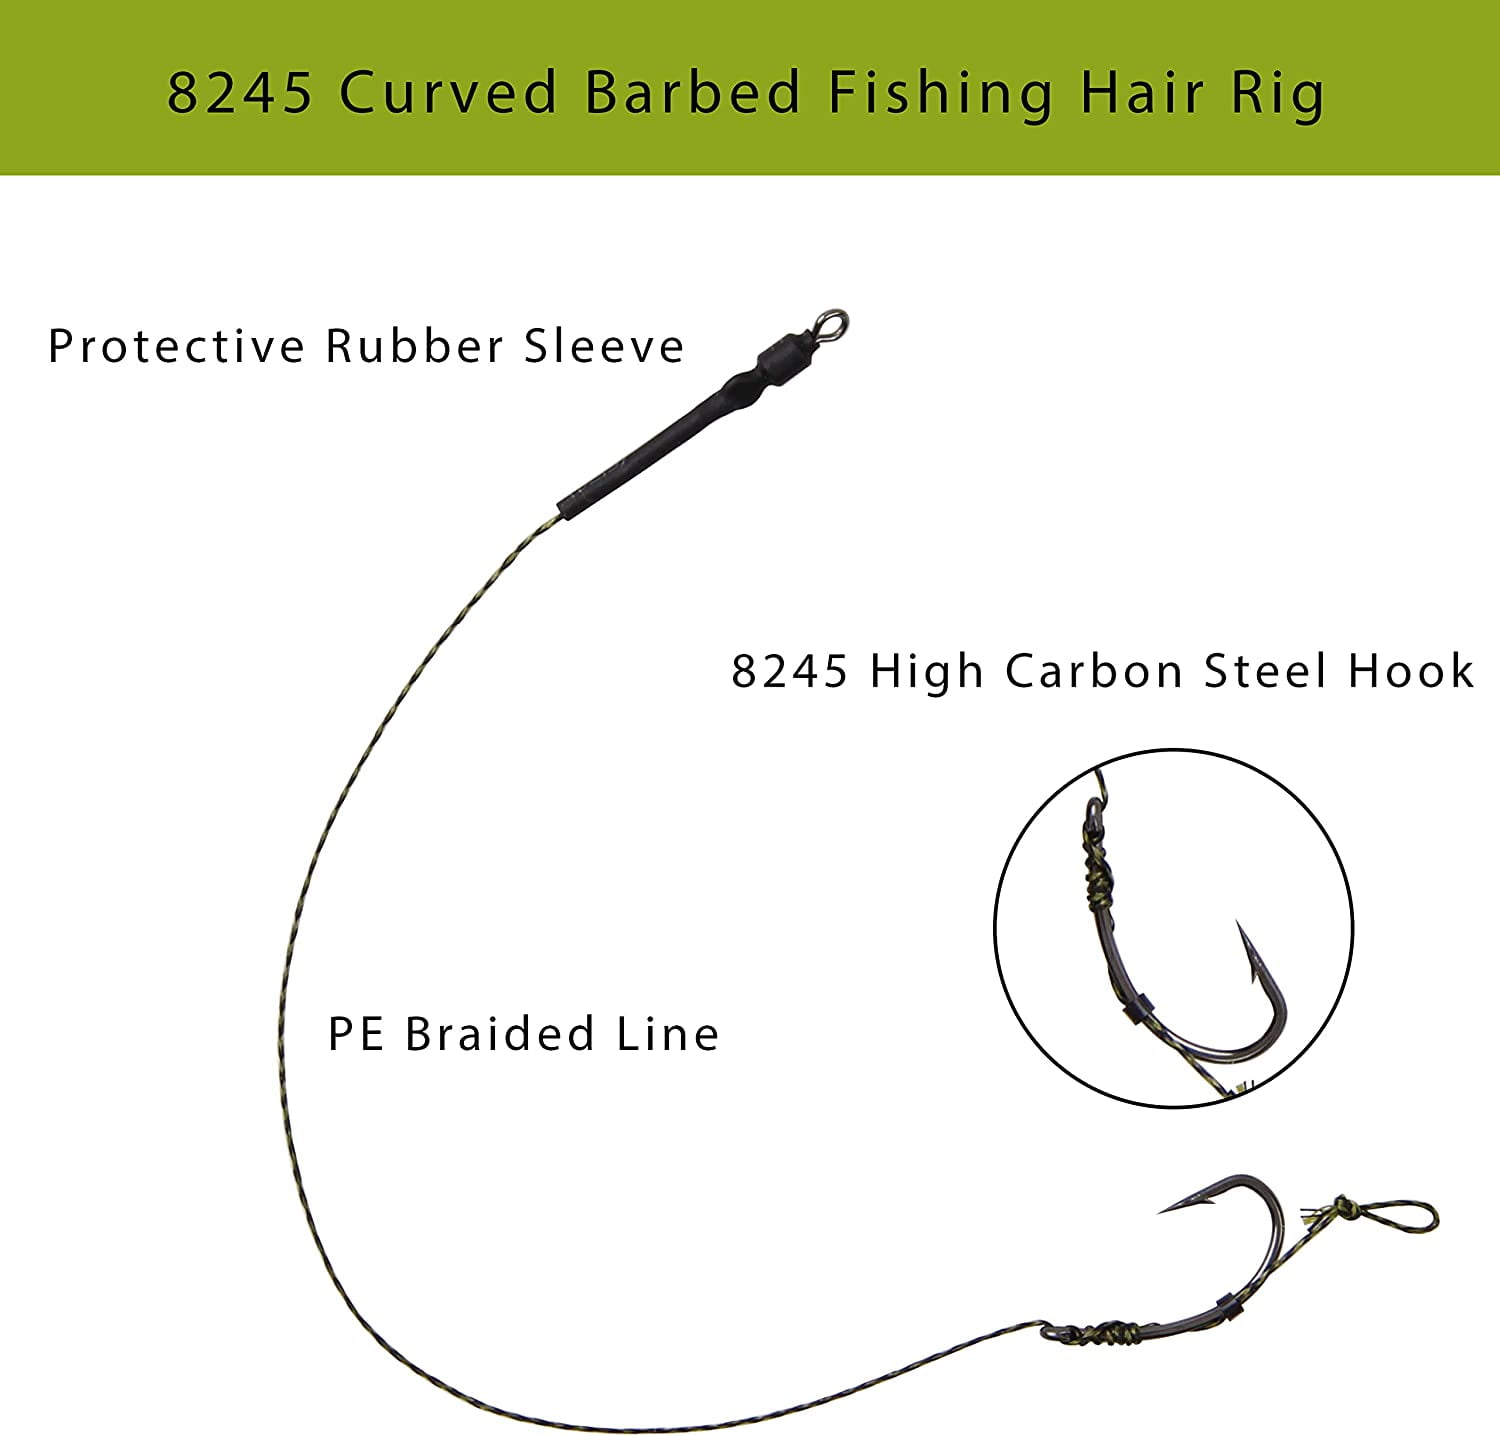 Carp Fishing Hair Rigs 45pcs Curved Barbed Carp Hook Braided Line